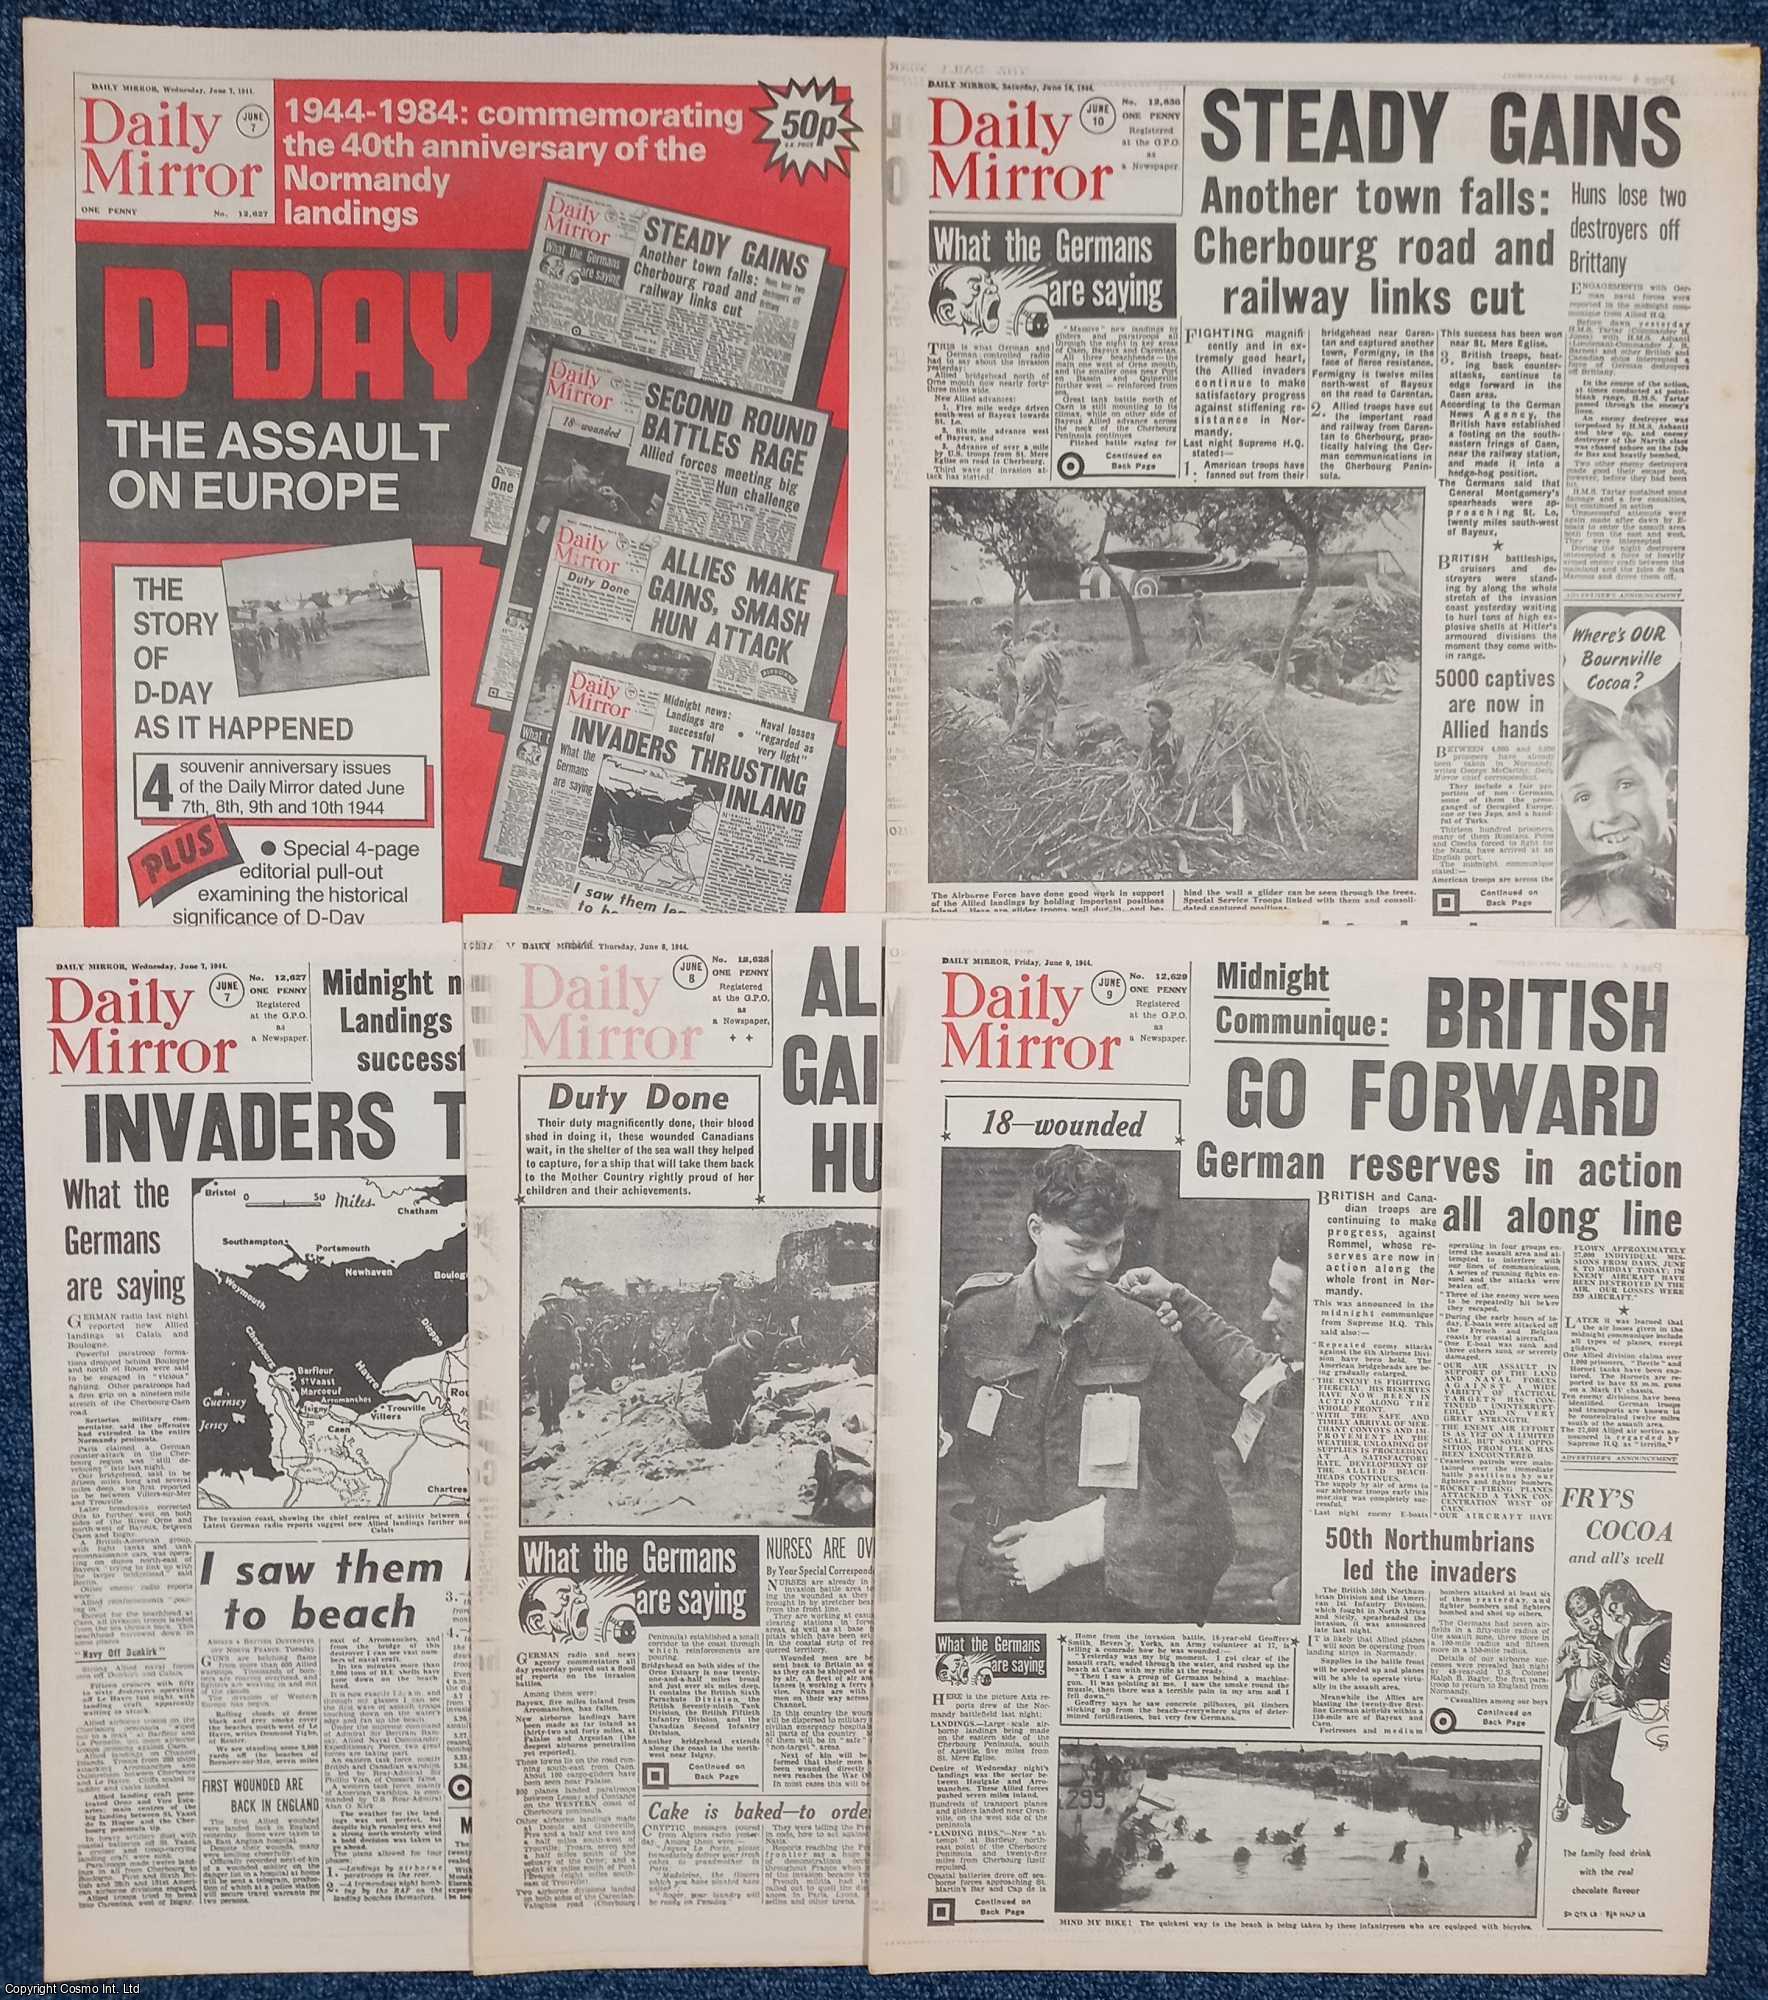 WORLD WAR TWO - D-Day, the Assault on Europe. 4 Facsimile Souvenir Issues of the Daily Mirror dated 7th, 8th, 9th, & 10th 1944. 1944-1984: commemorating the 40th anniversary of the Normandy Landings.